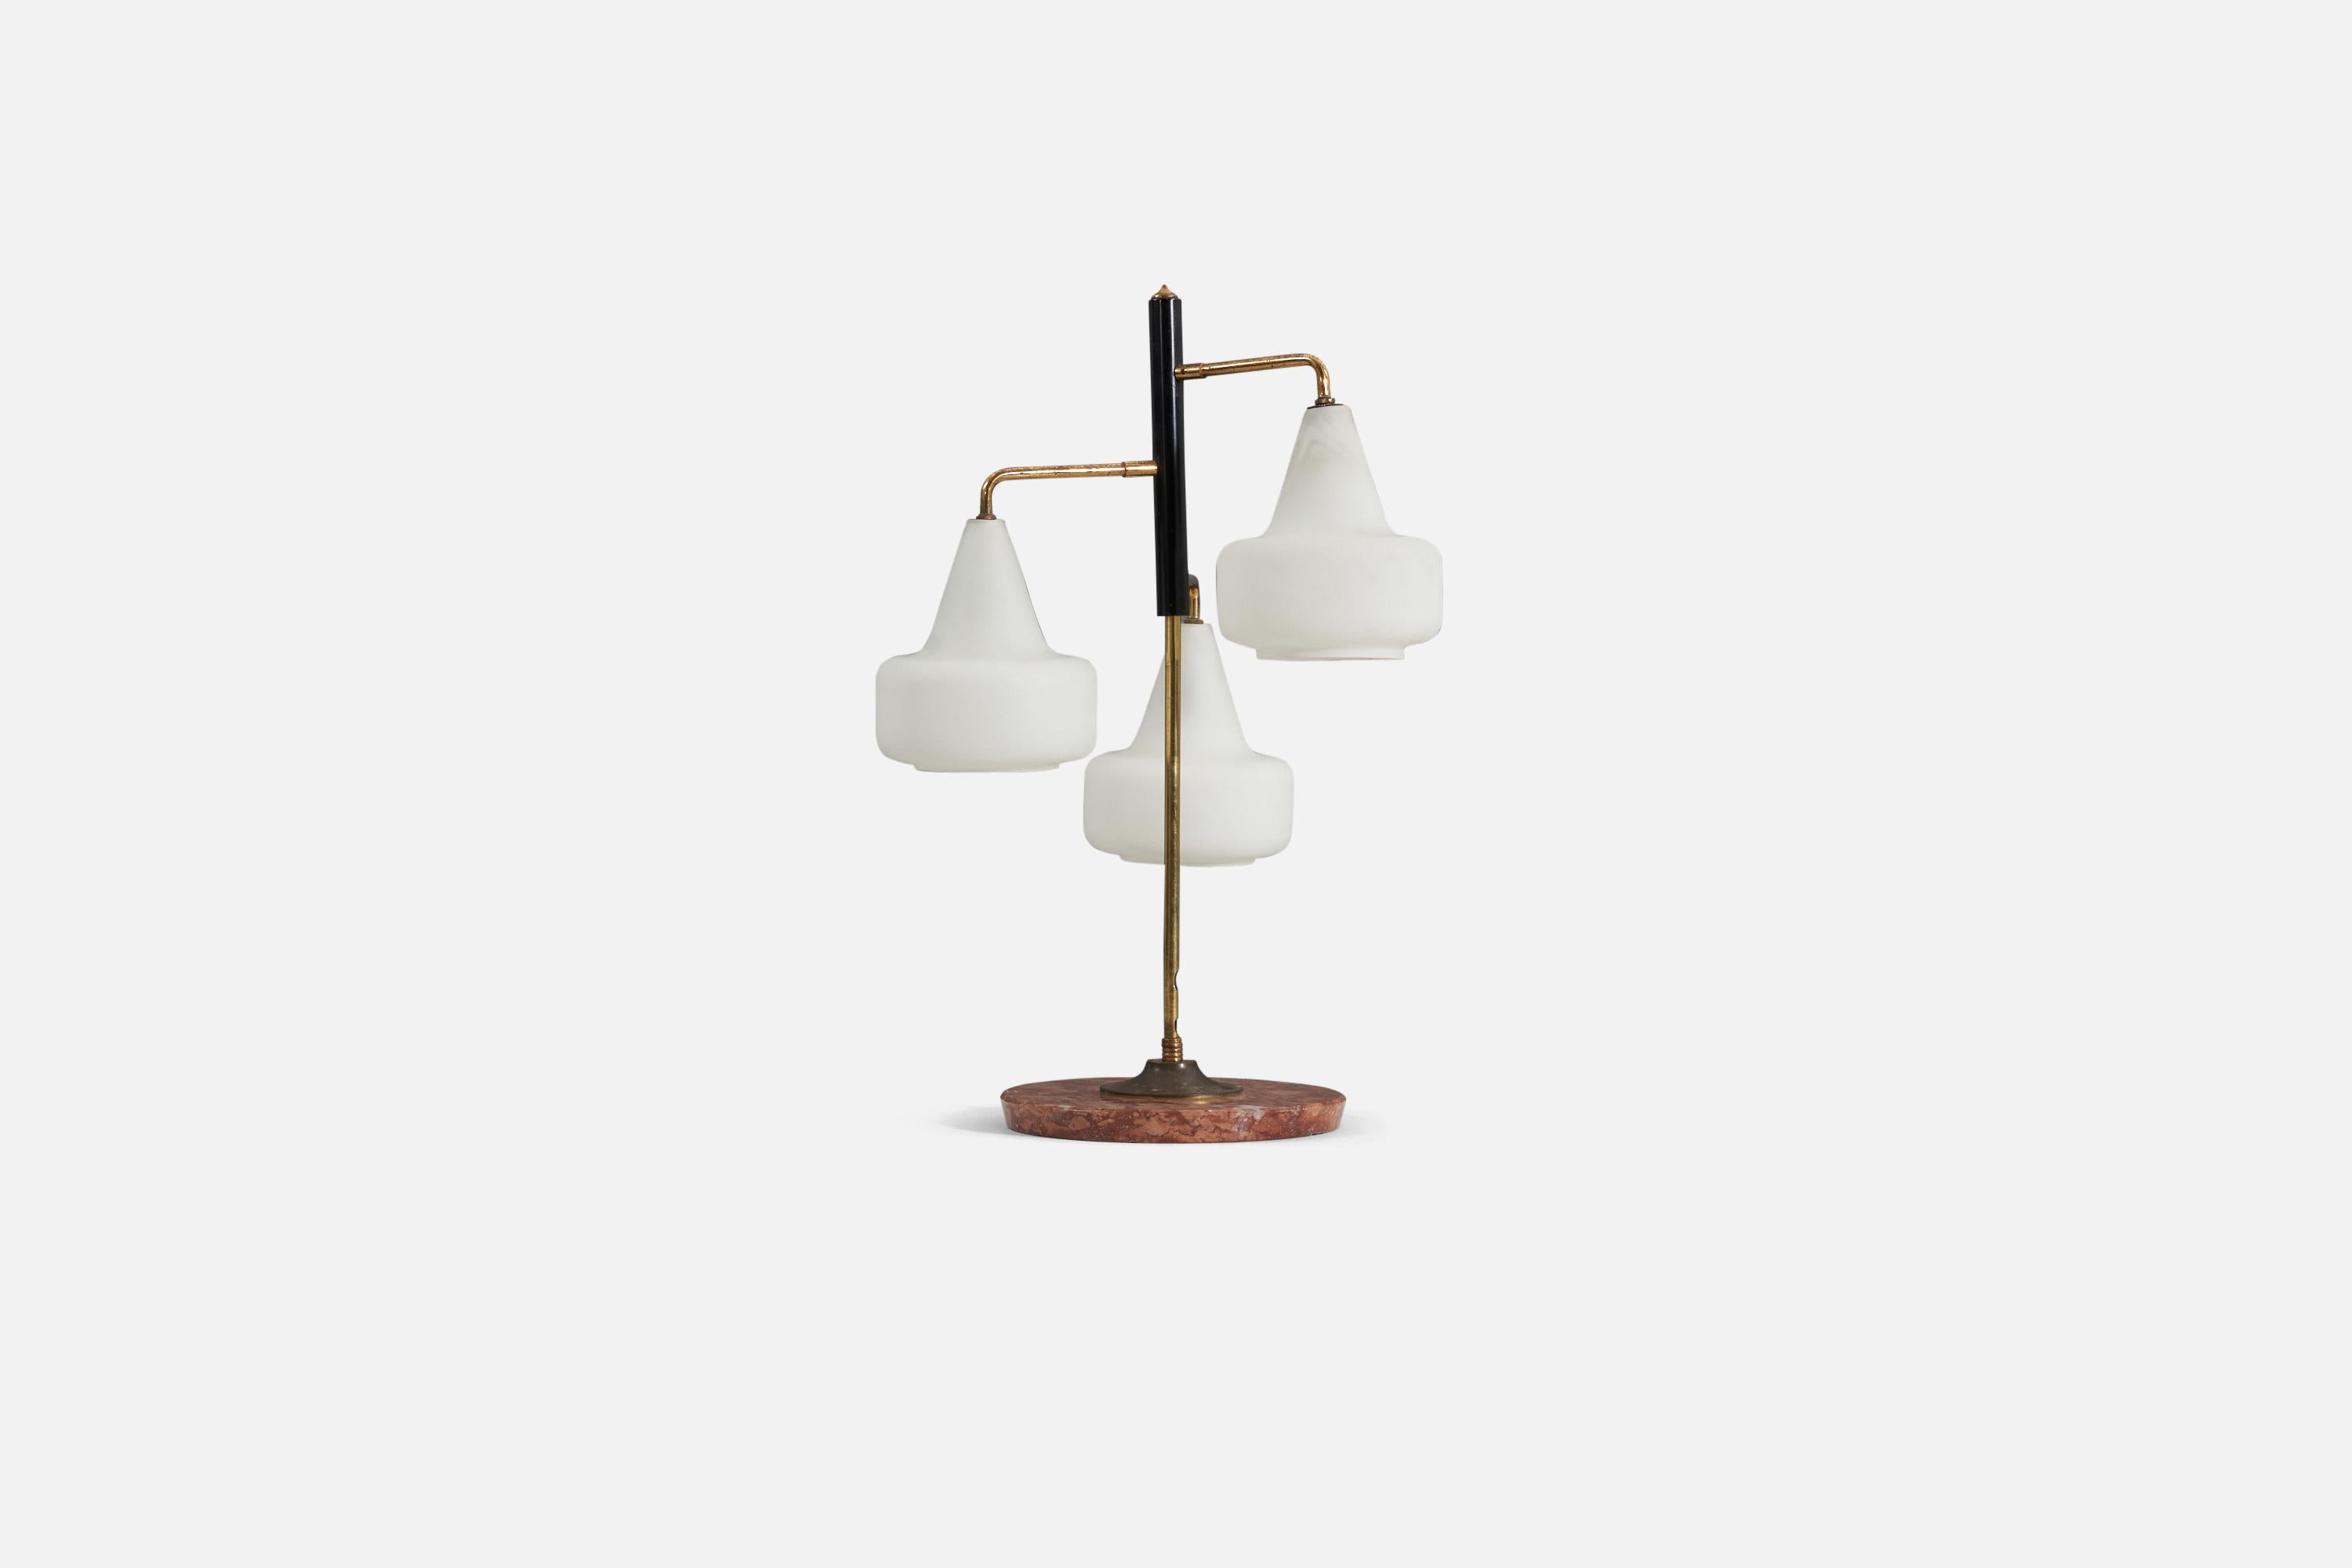 A three-armed table lamp designed and produced in Italy, 1950s featuring a marble base, brass stem with frosted glass shades.